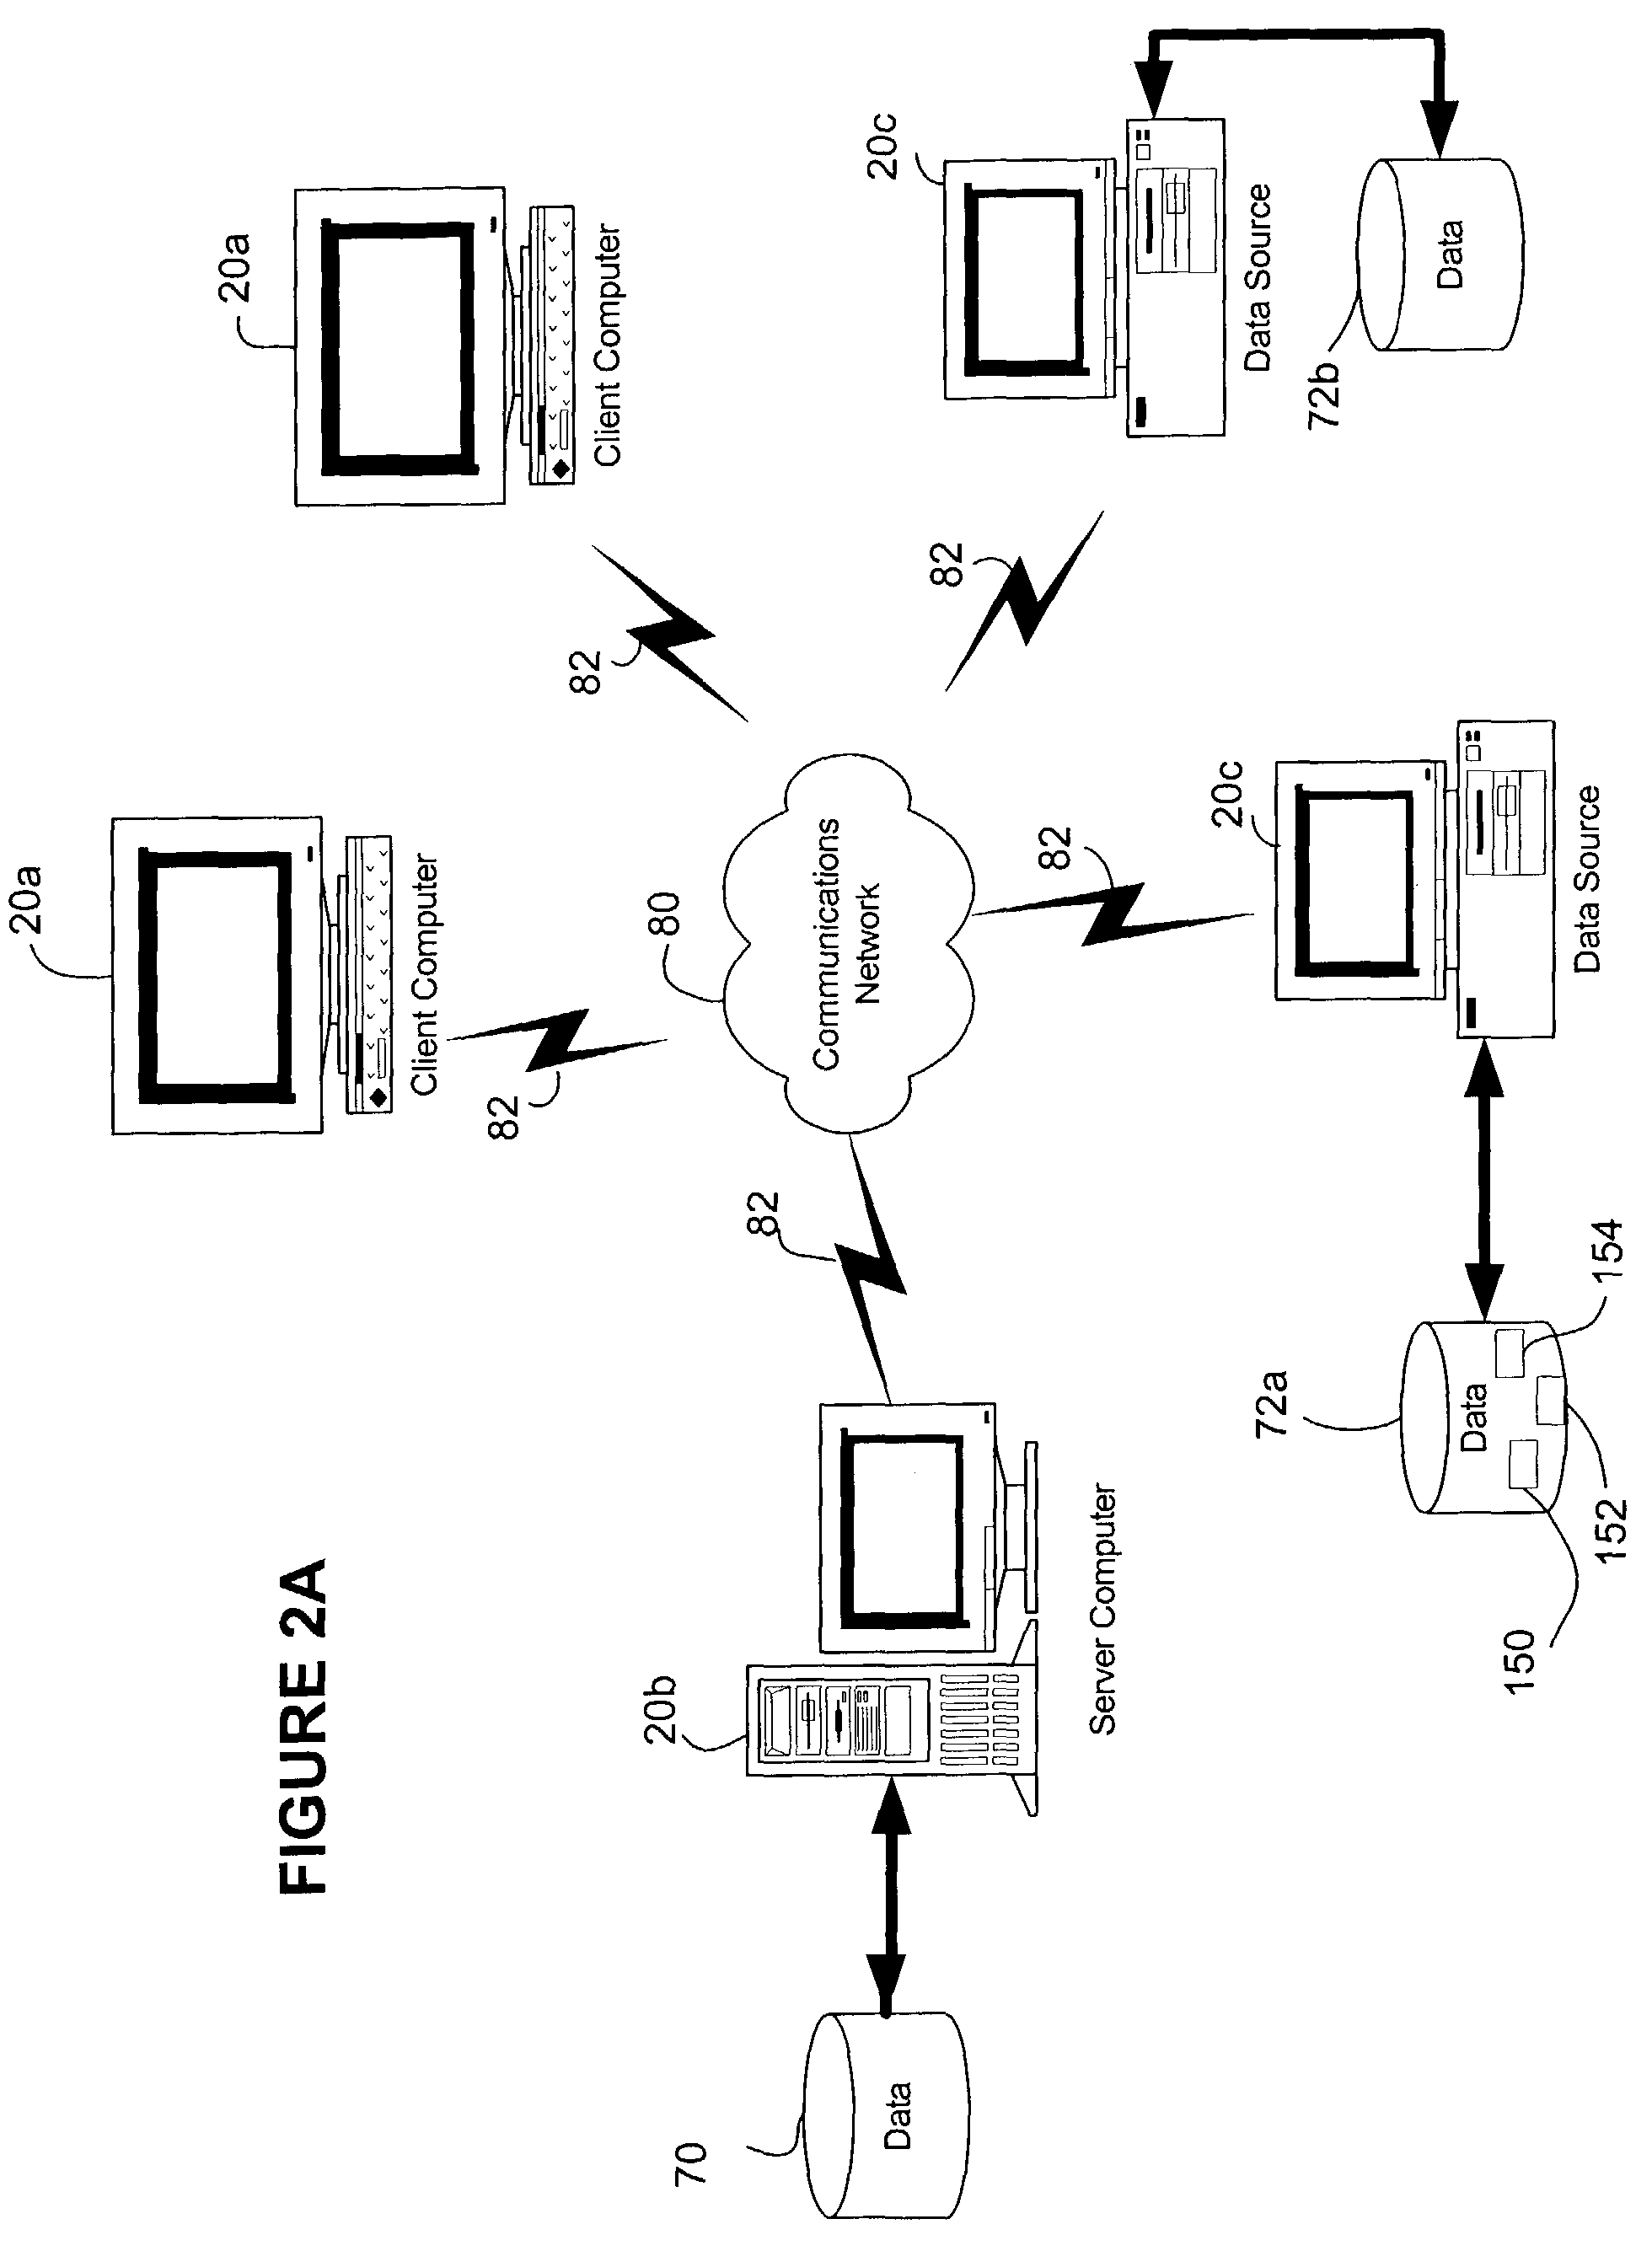 Systems and methods for scheduling data flow execution based on an arbitrary graph describing the desired data flow